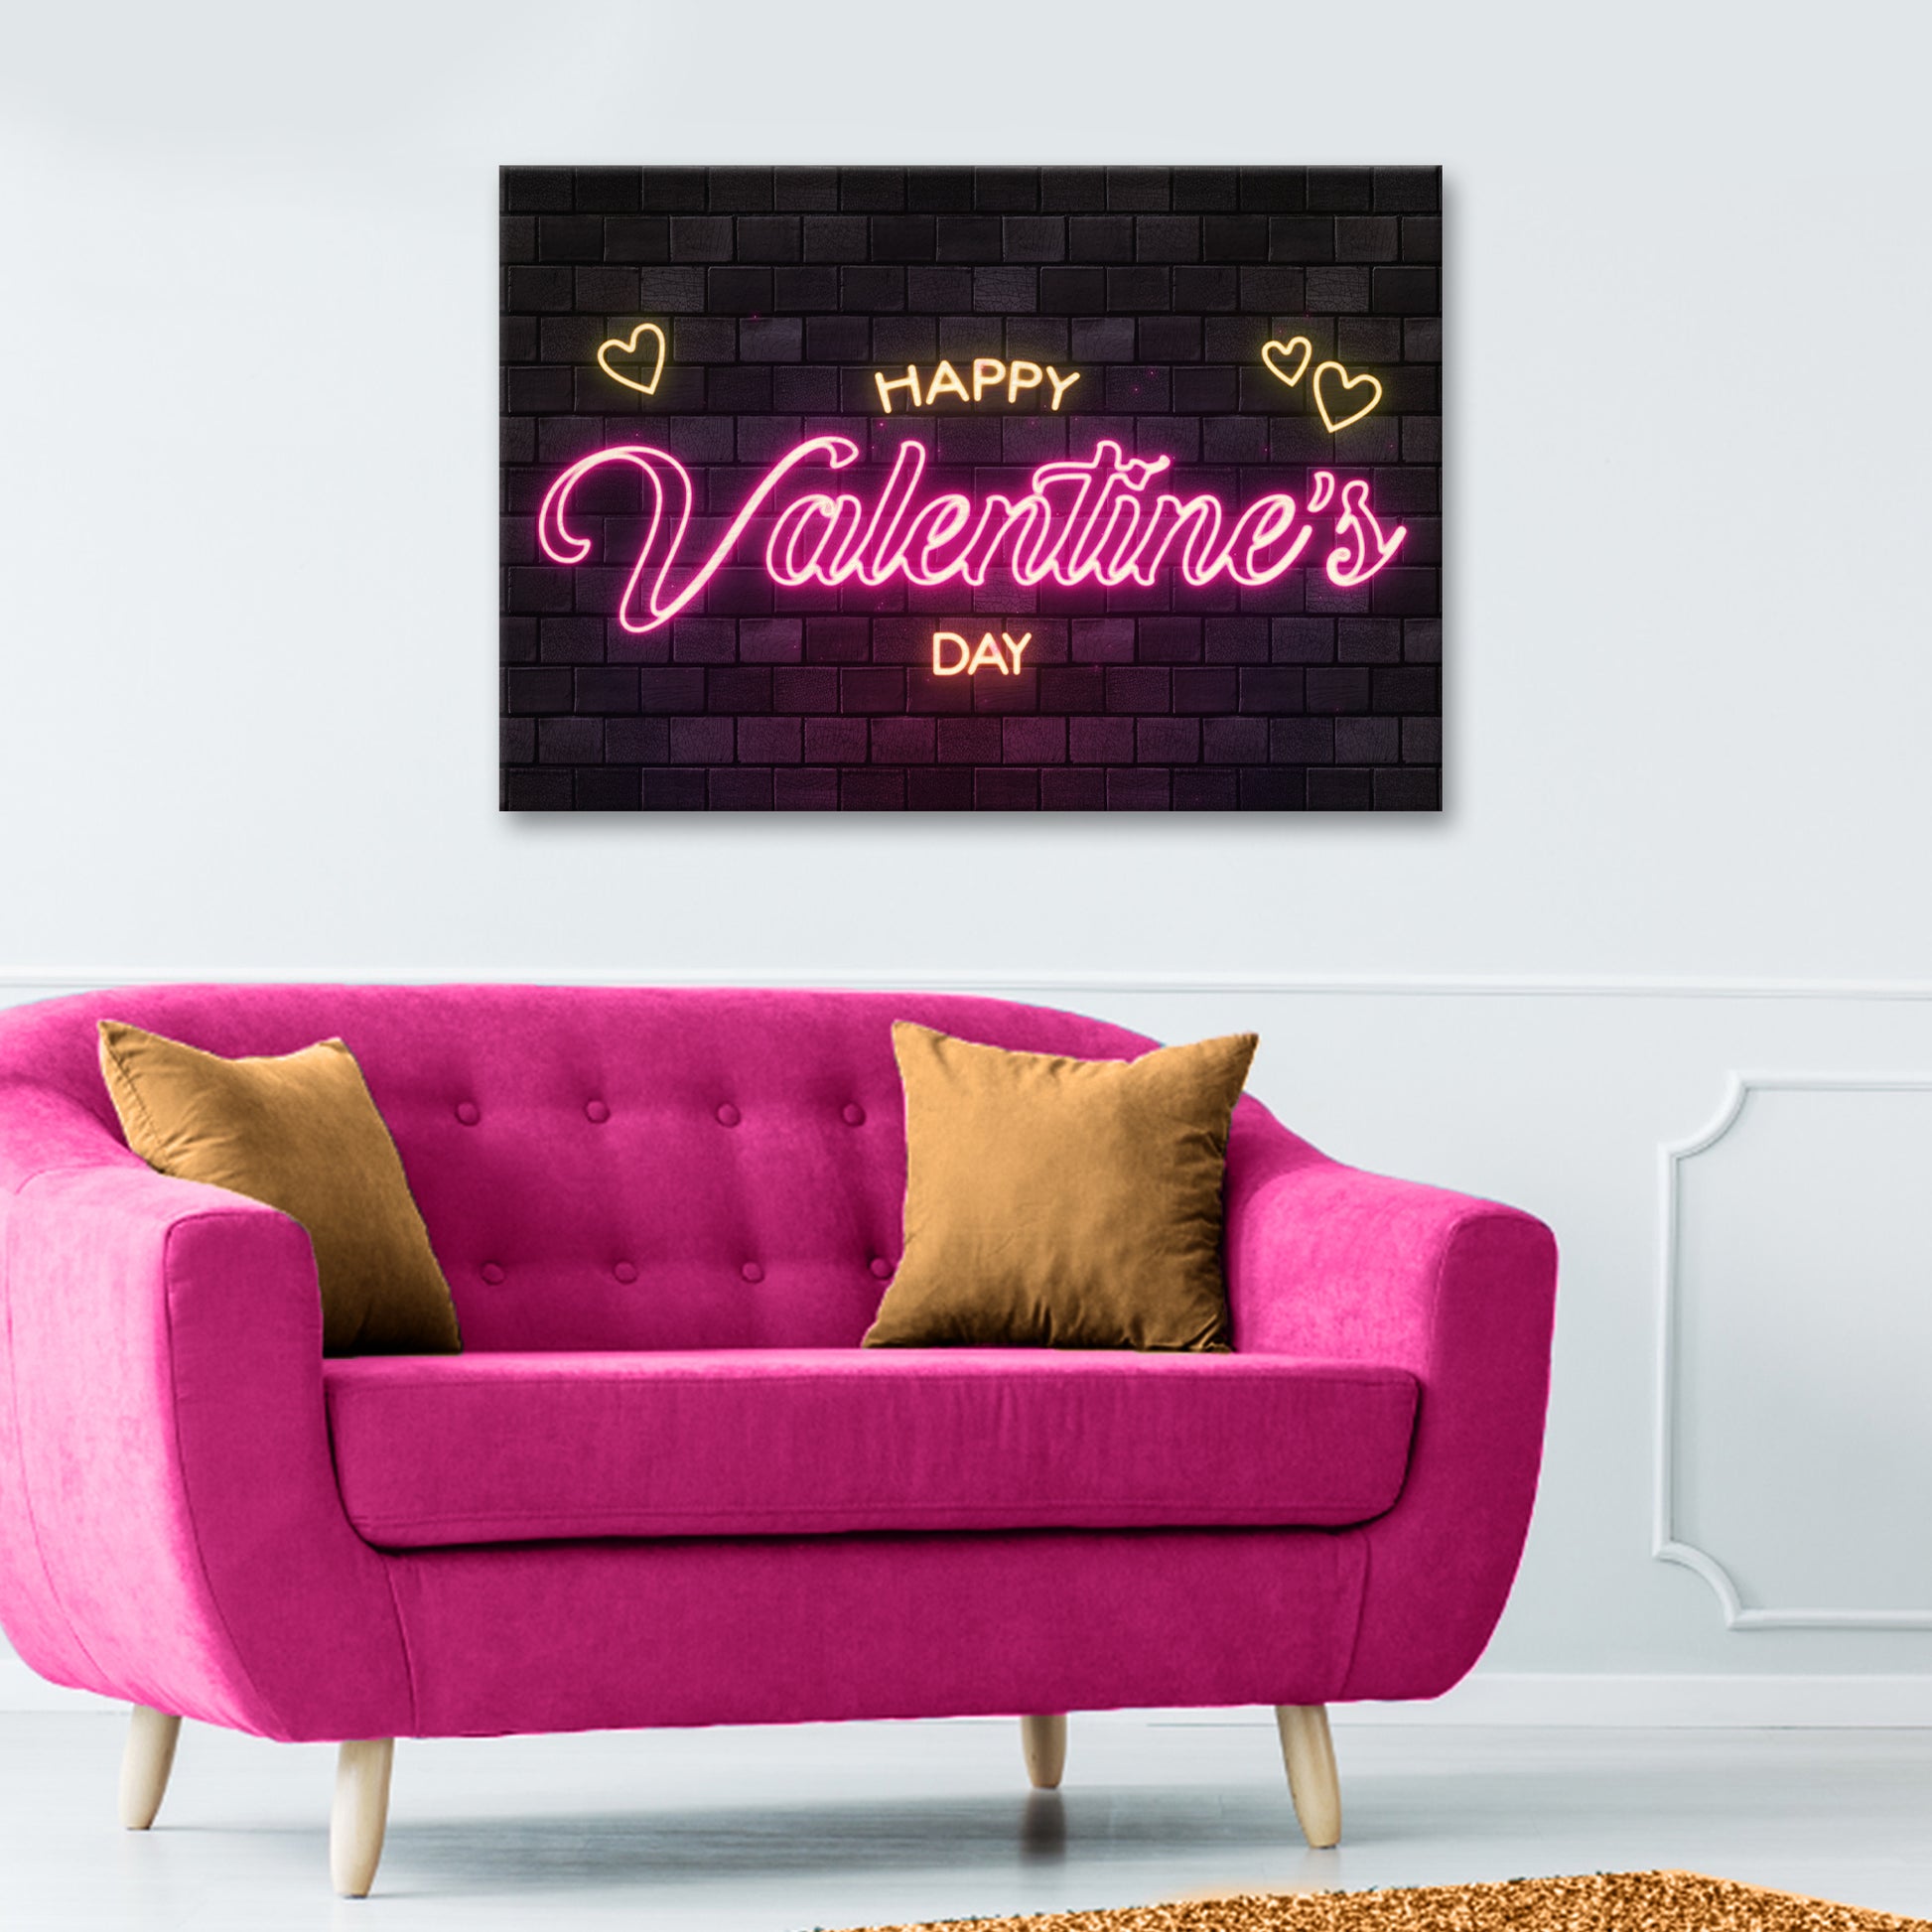 Neon Valentine's Day Sign - Image by Tailored Canvases